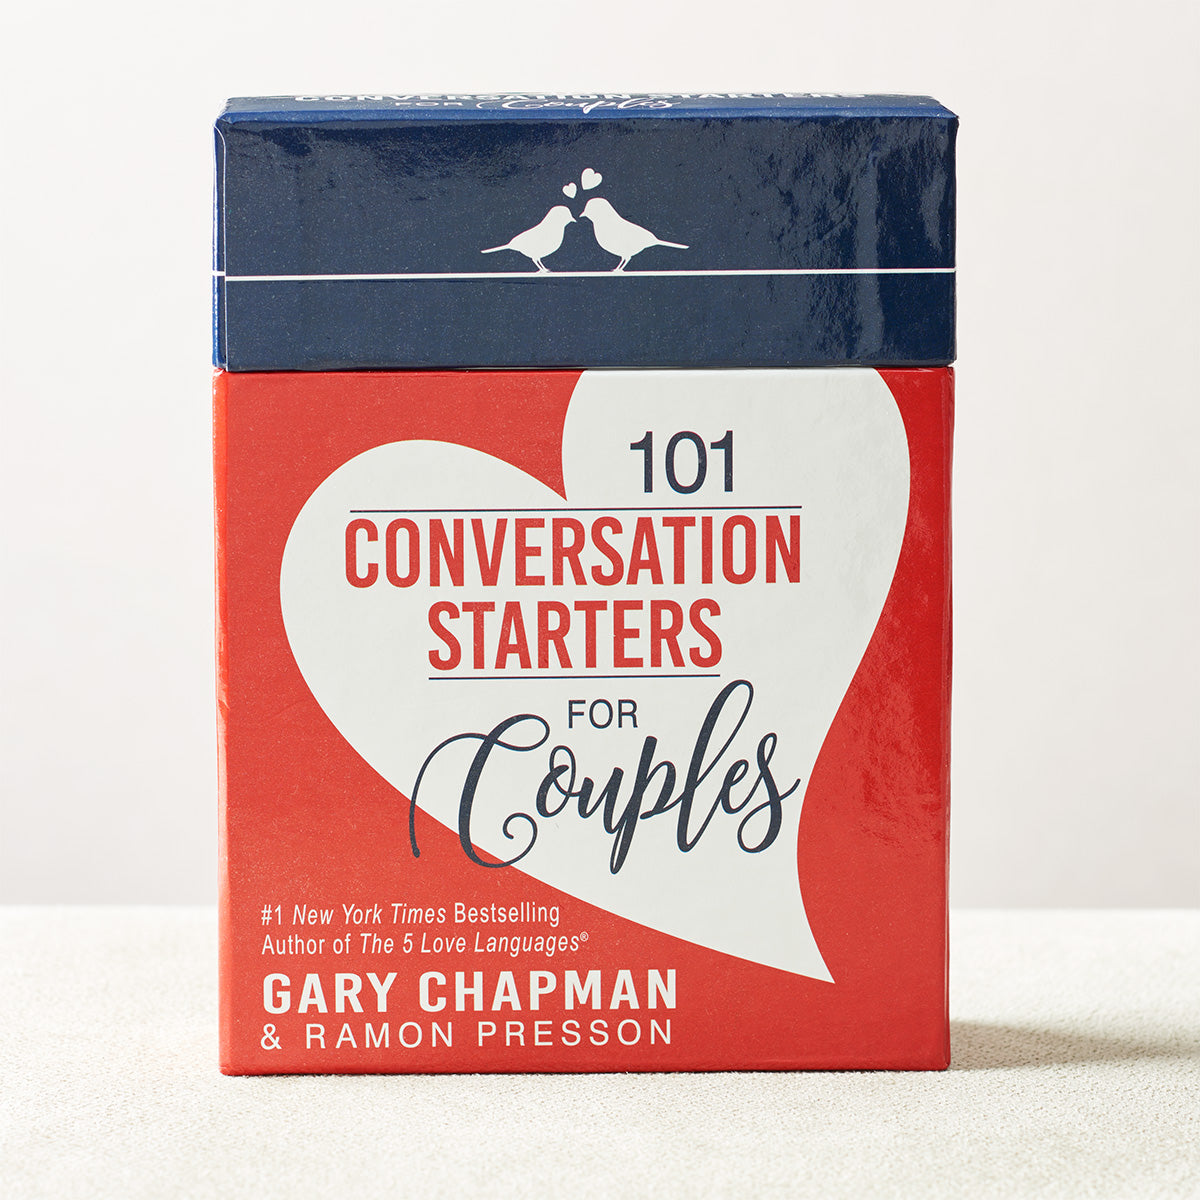 Image of 101 Conversation Starters for Couples other